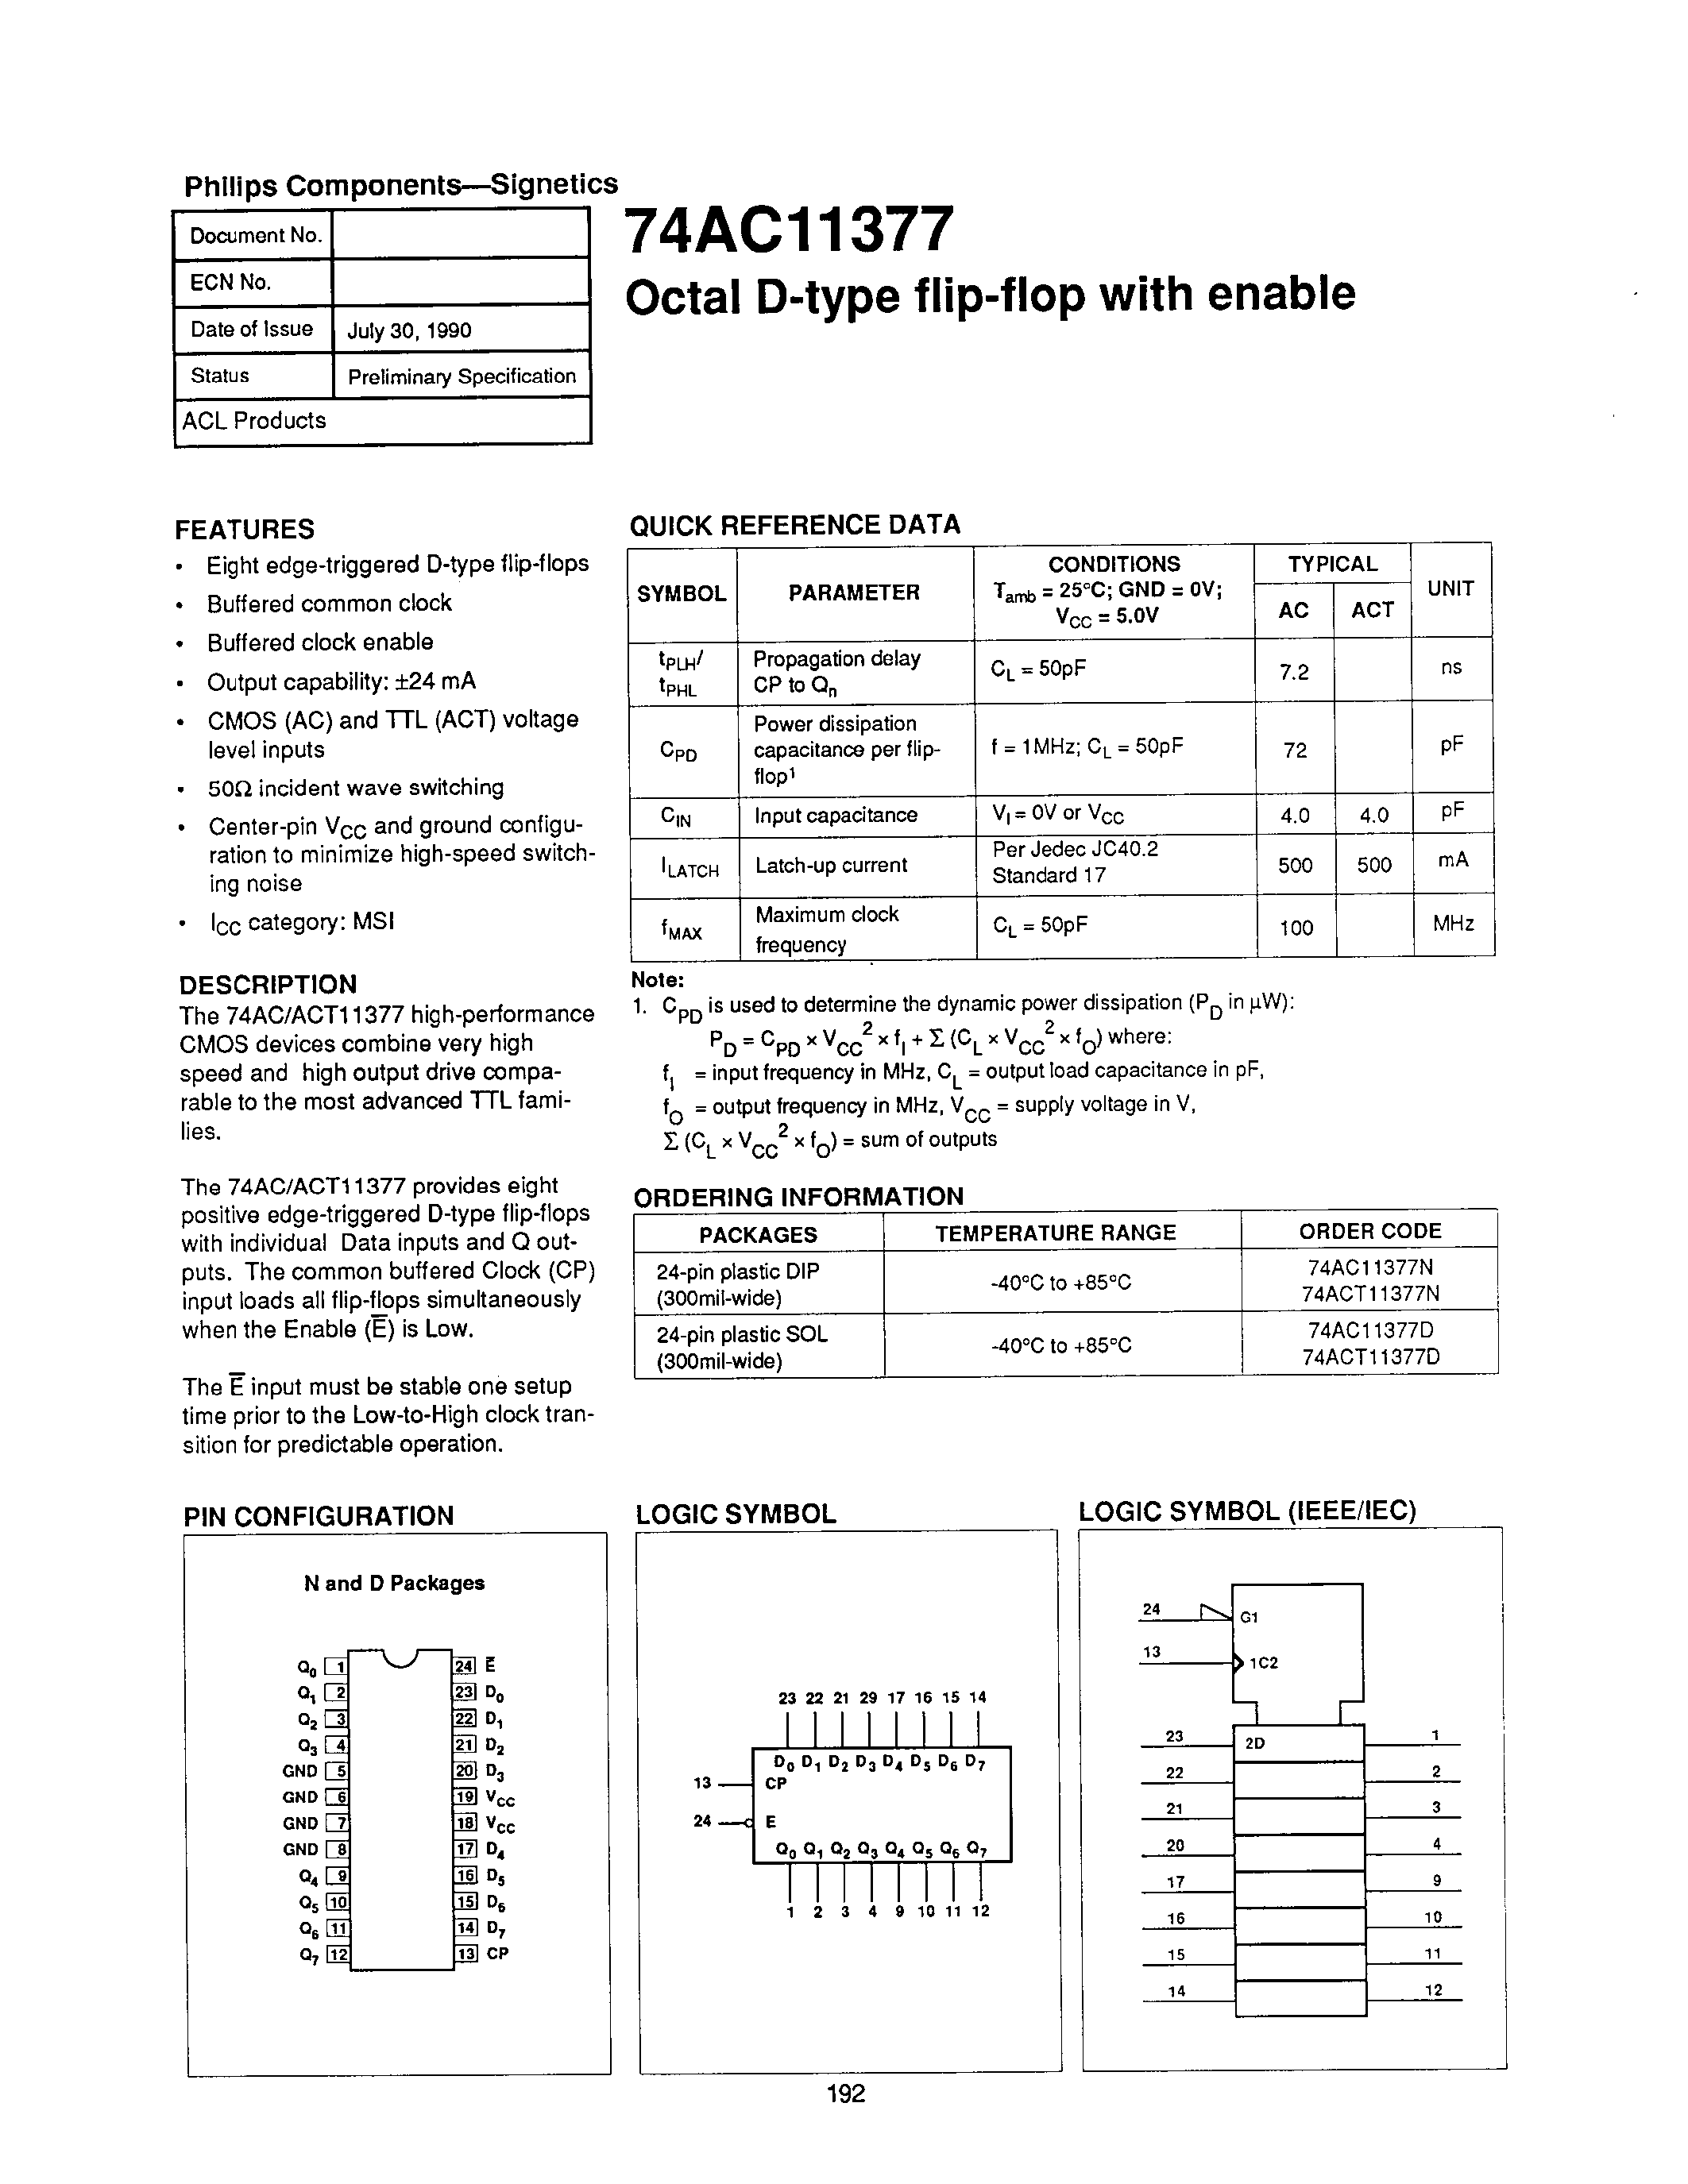 Datasheet 74AC11377D - OCTAL D TYPE FLIP FLOP WITH ENABLE page 1